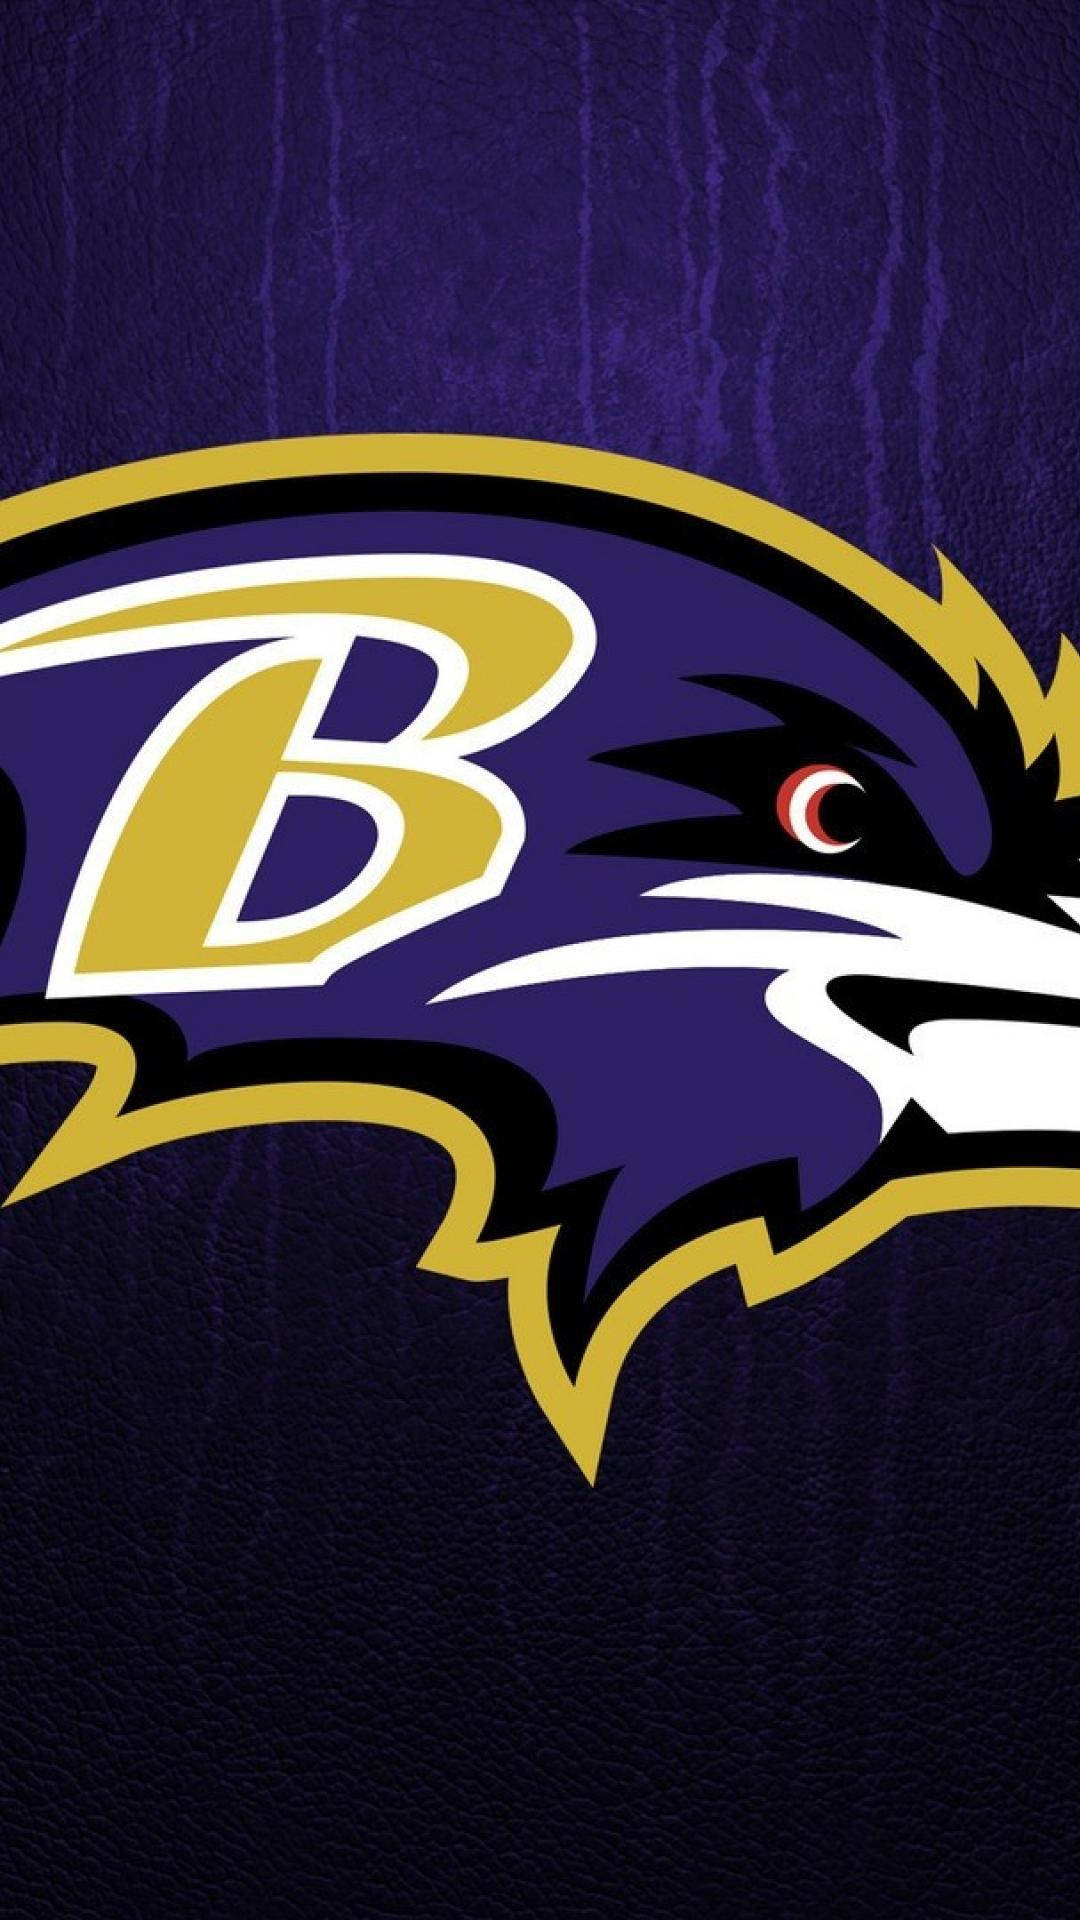 Having a Baltimore Ravens Iphone lets you experience the NFL like the players do. Wallpaper